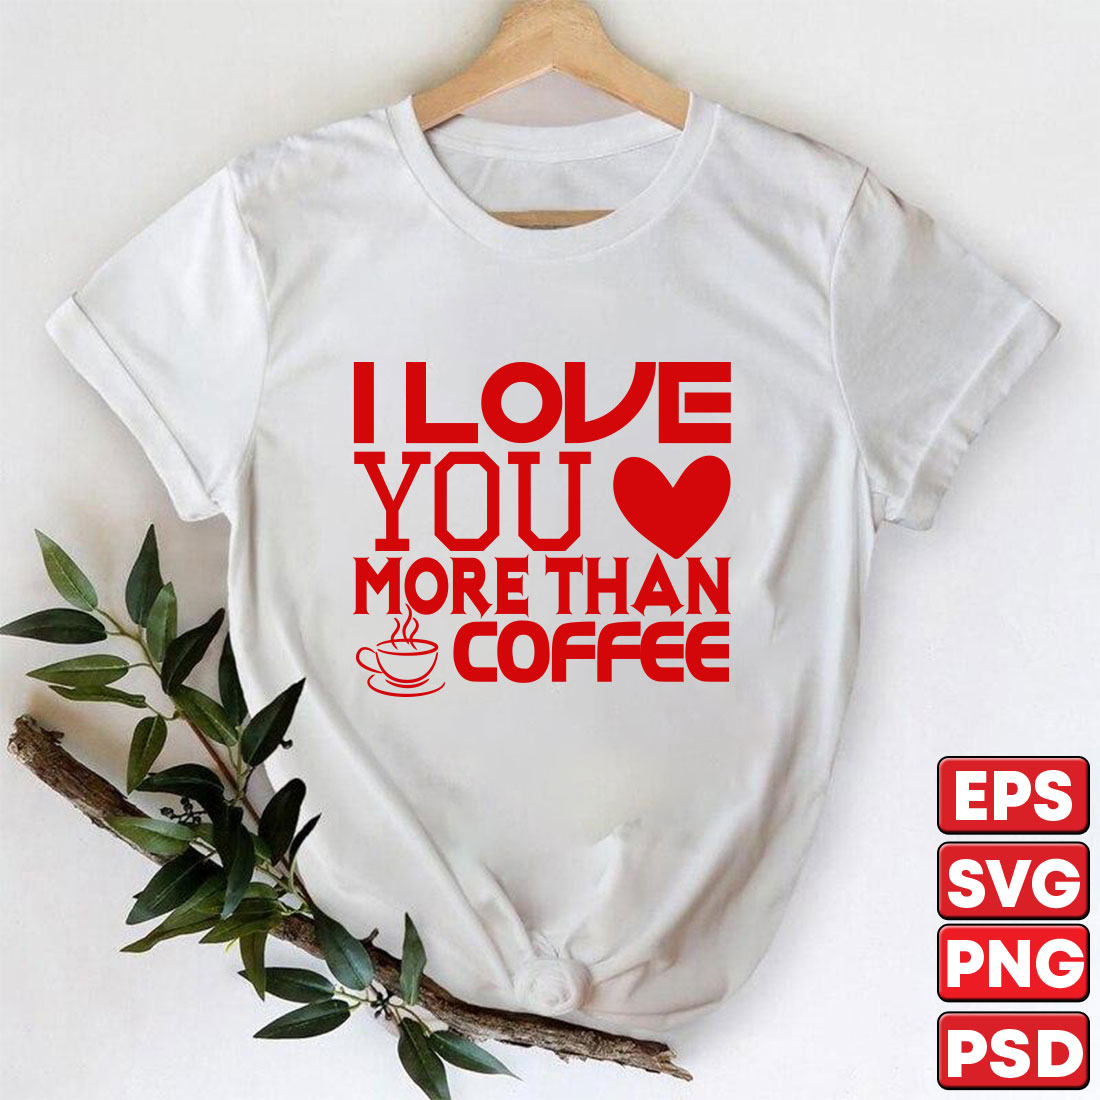 I love you more than coffee cover image.